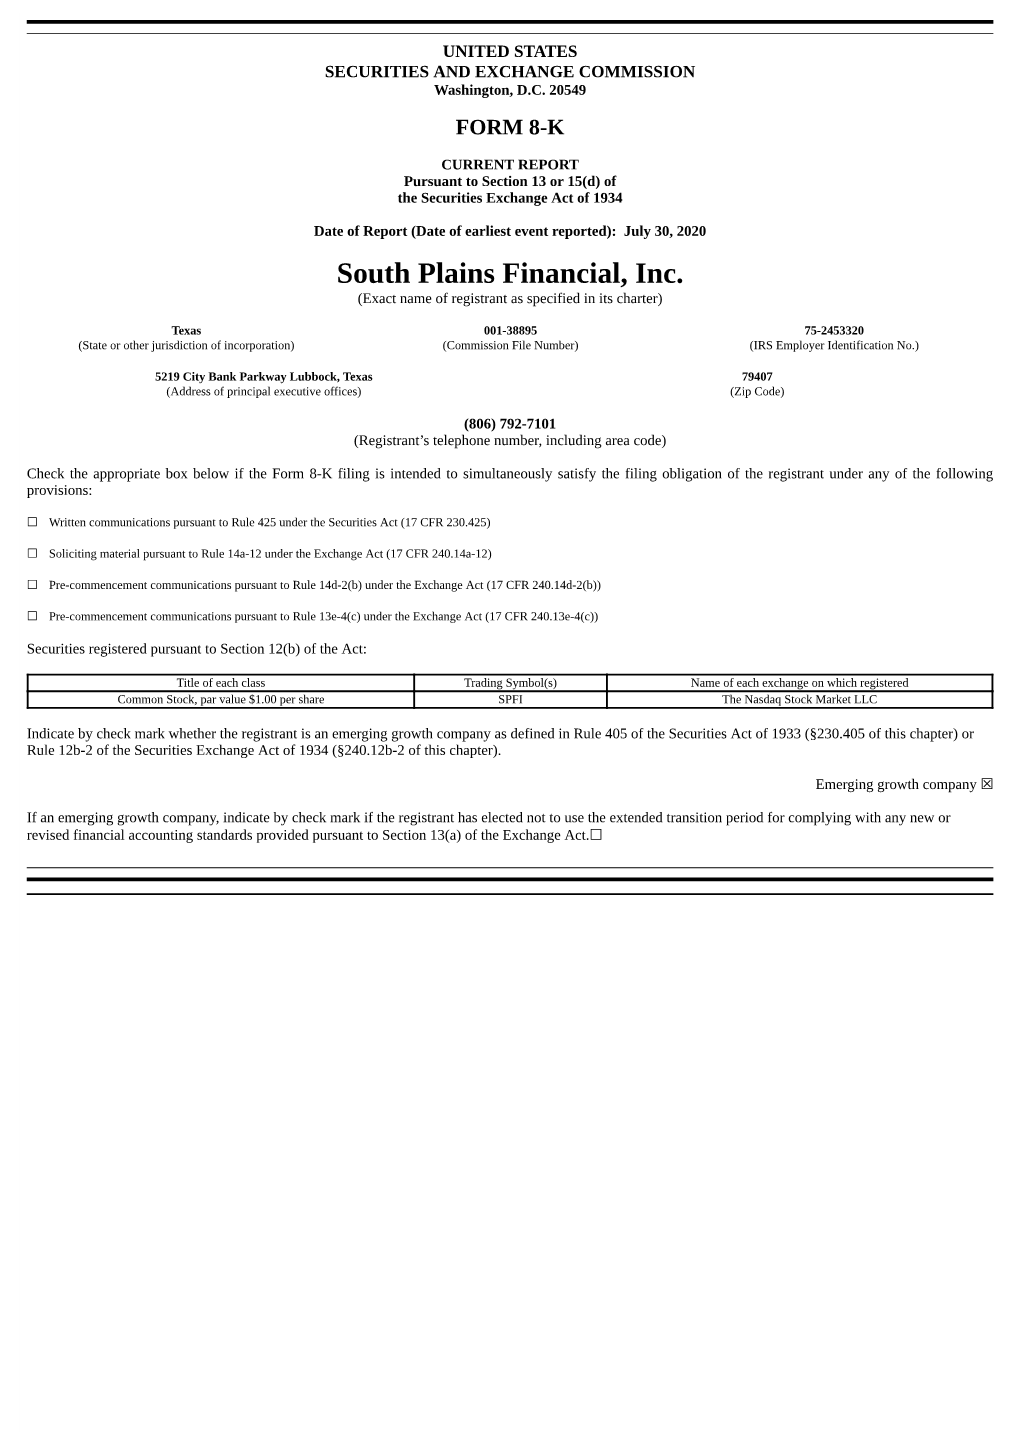 South Plains Financial, Inc. (Exact Name of Registrant As Specified in Its Charter)